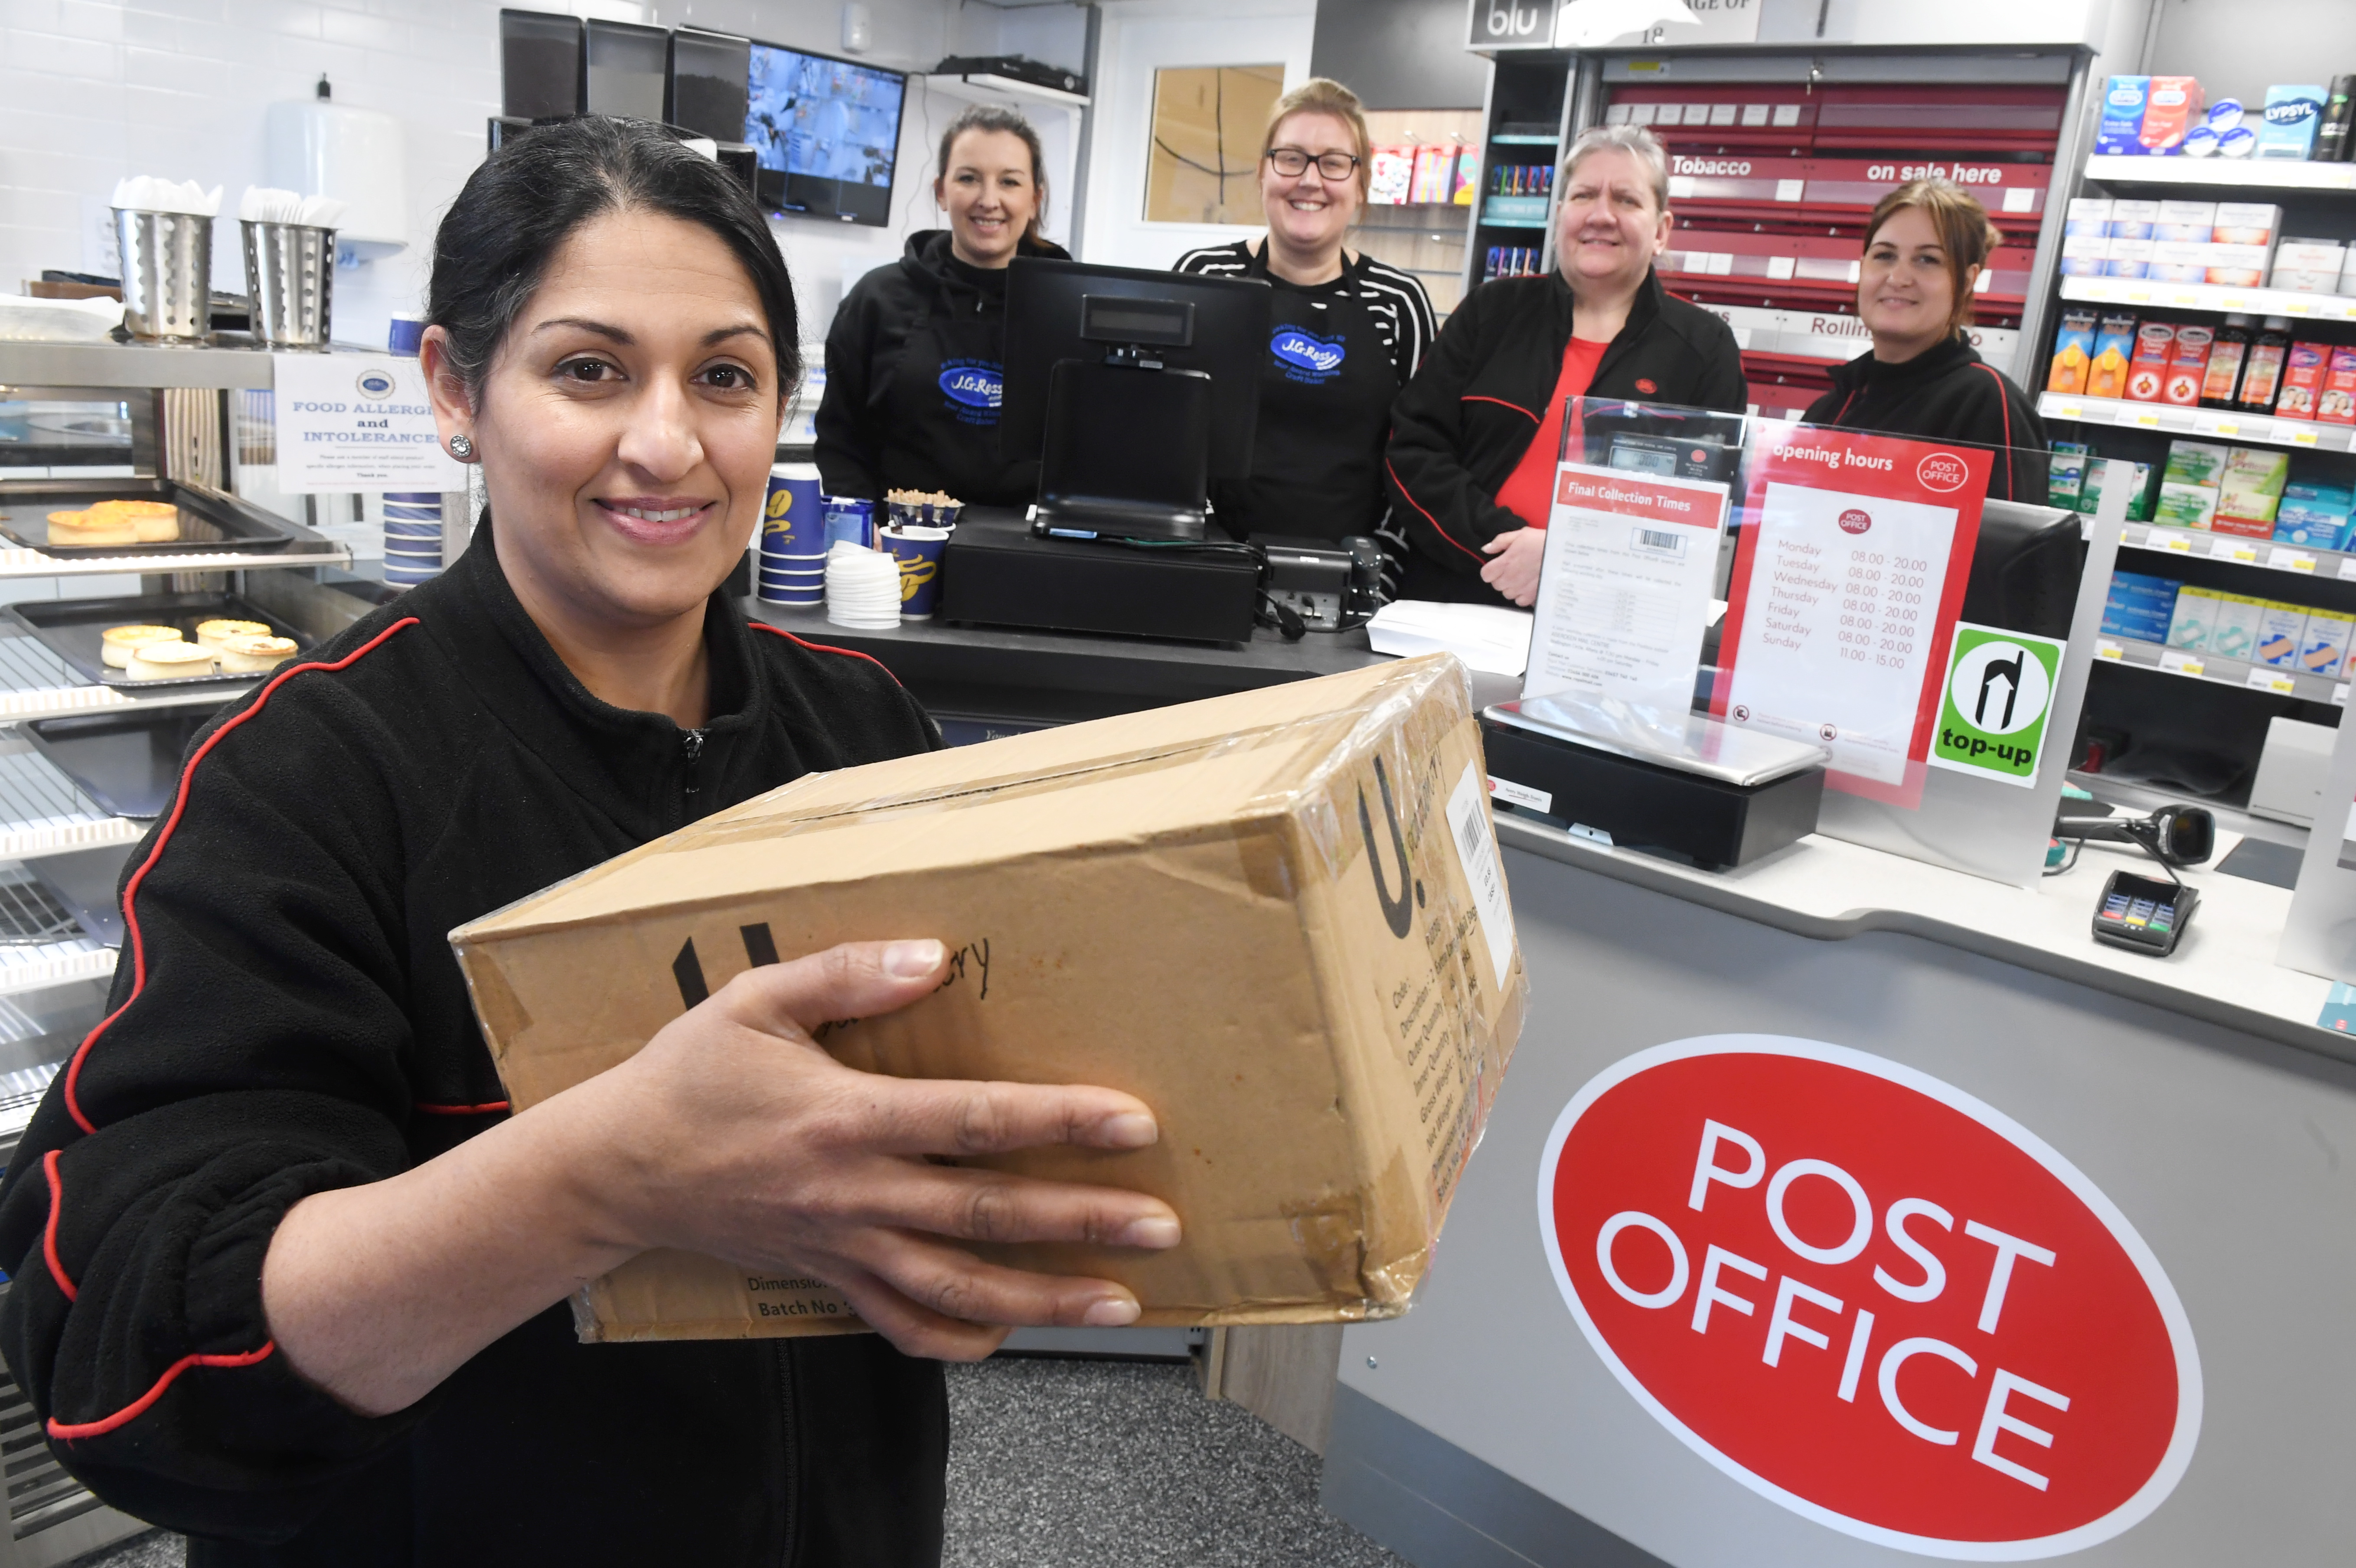 A new post office in Woodside has opened on the site of the old Chalmers bakery.